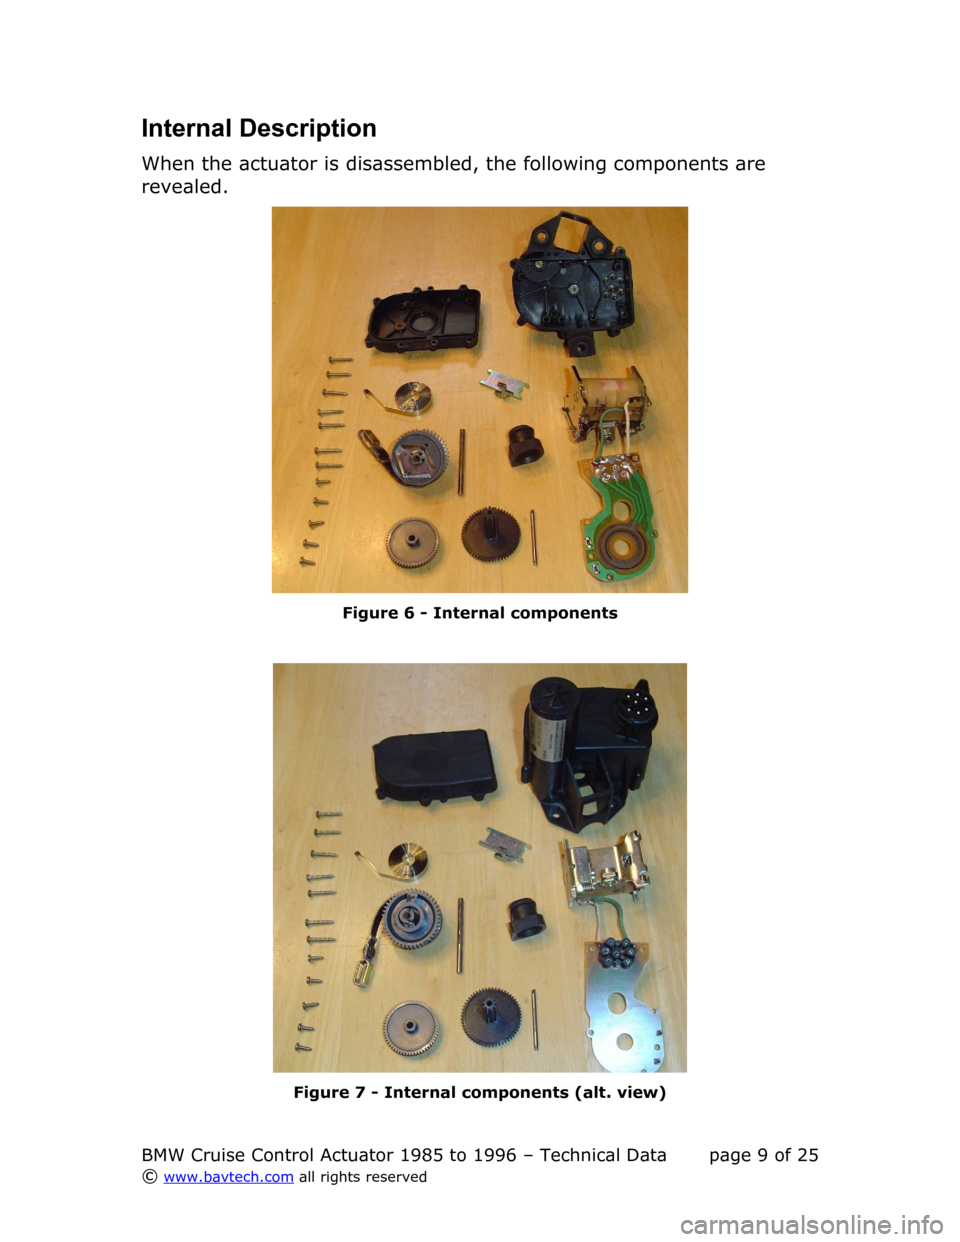 BMW 7 SERIES 1989 E32 Cruise Control Acutator Internal Description
When the actuator is disassembled, the following components are  
revealed.
Figure  6  - Internal components
Figure  7  - Internal components (alt. view)
BMW Cruise Control Actuat